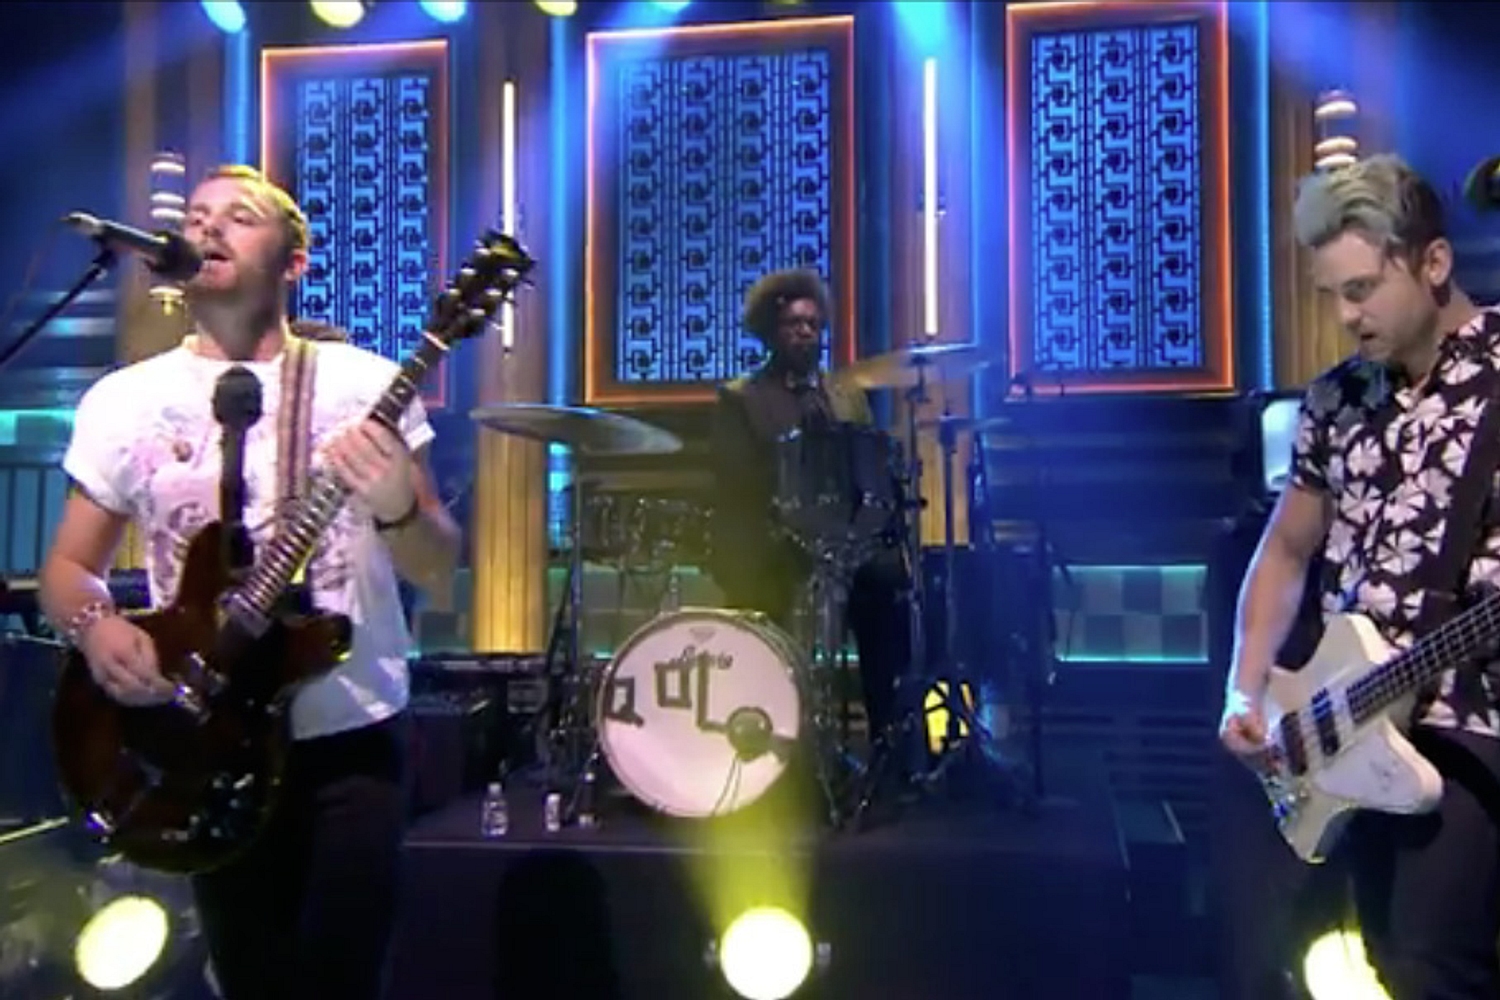 Questlove guests as Kings of Leon drummer on the Tonight Show